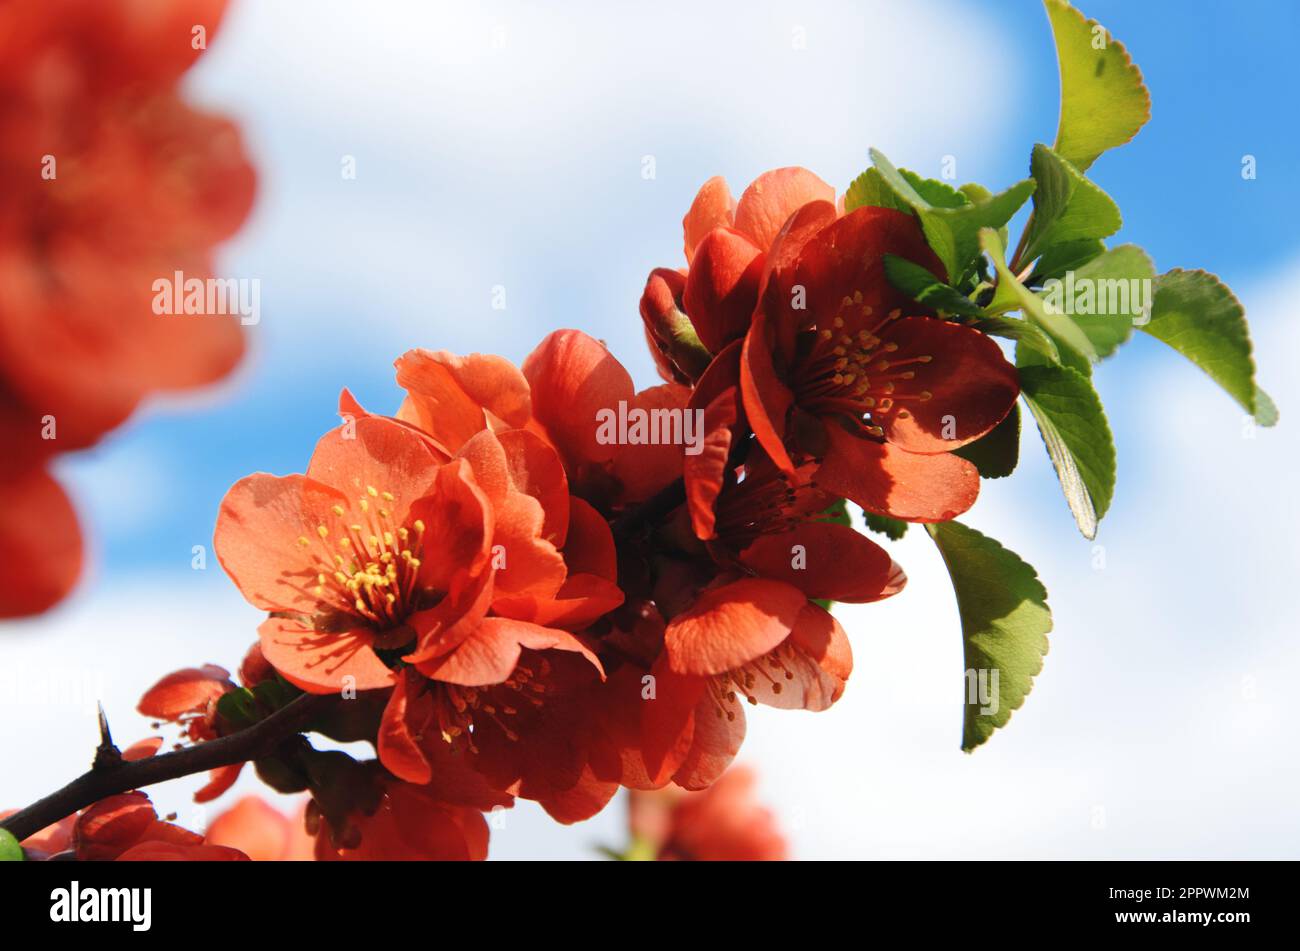 Chaenomeles japonica. Branch of blooming Japanese quince against blue sky with white clouds. Spring blossom of cydonia. Flowering Maule's quince Stock Photo